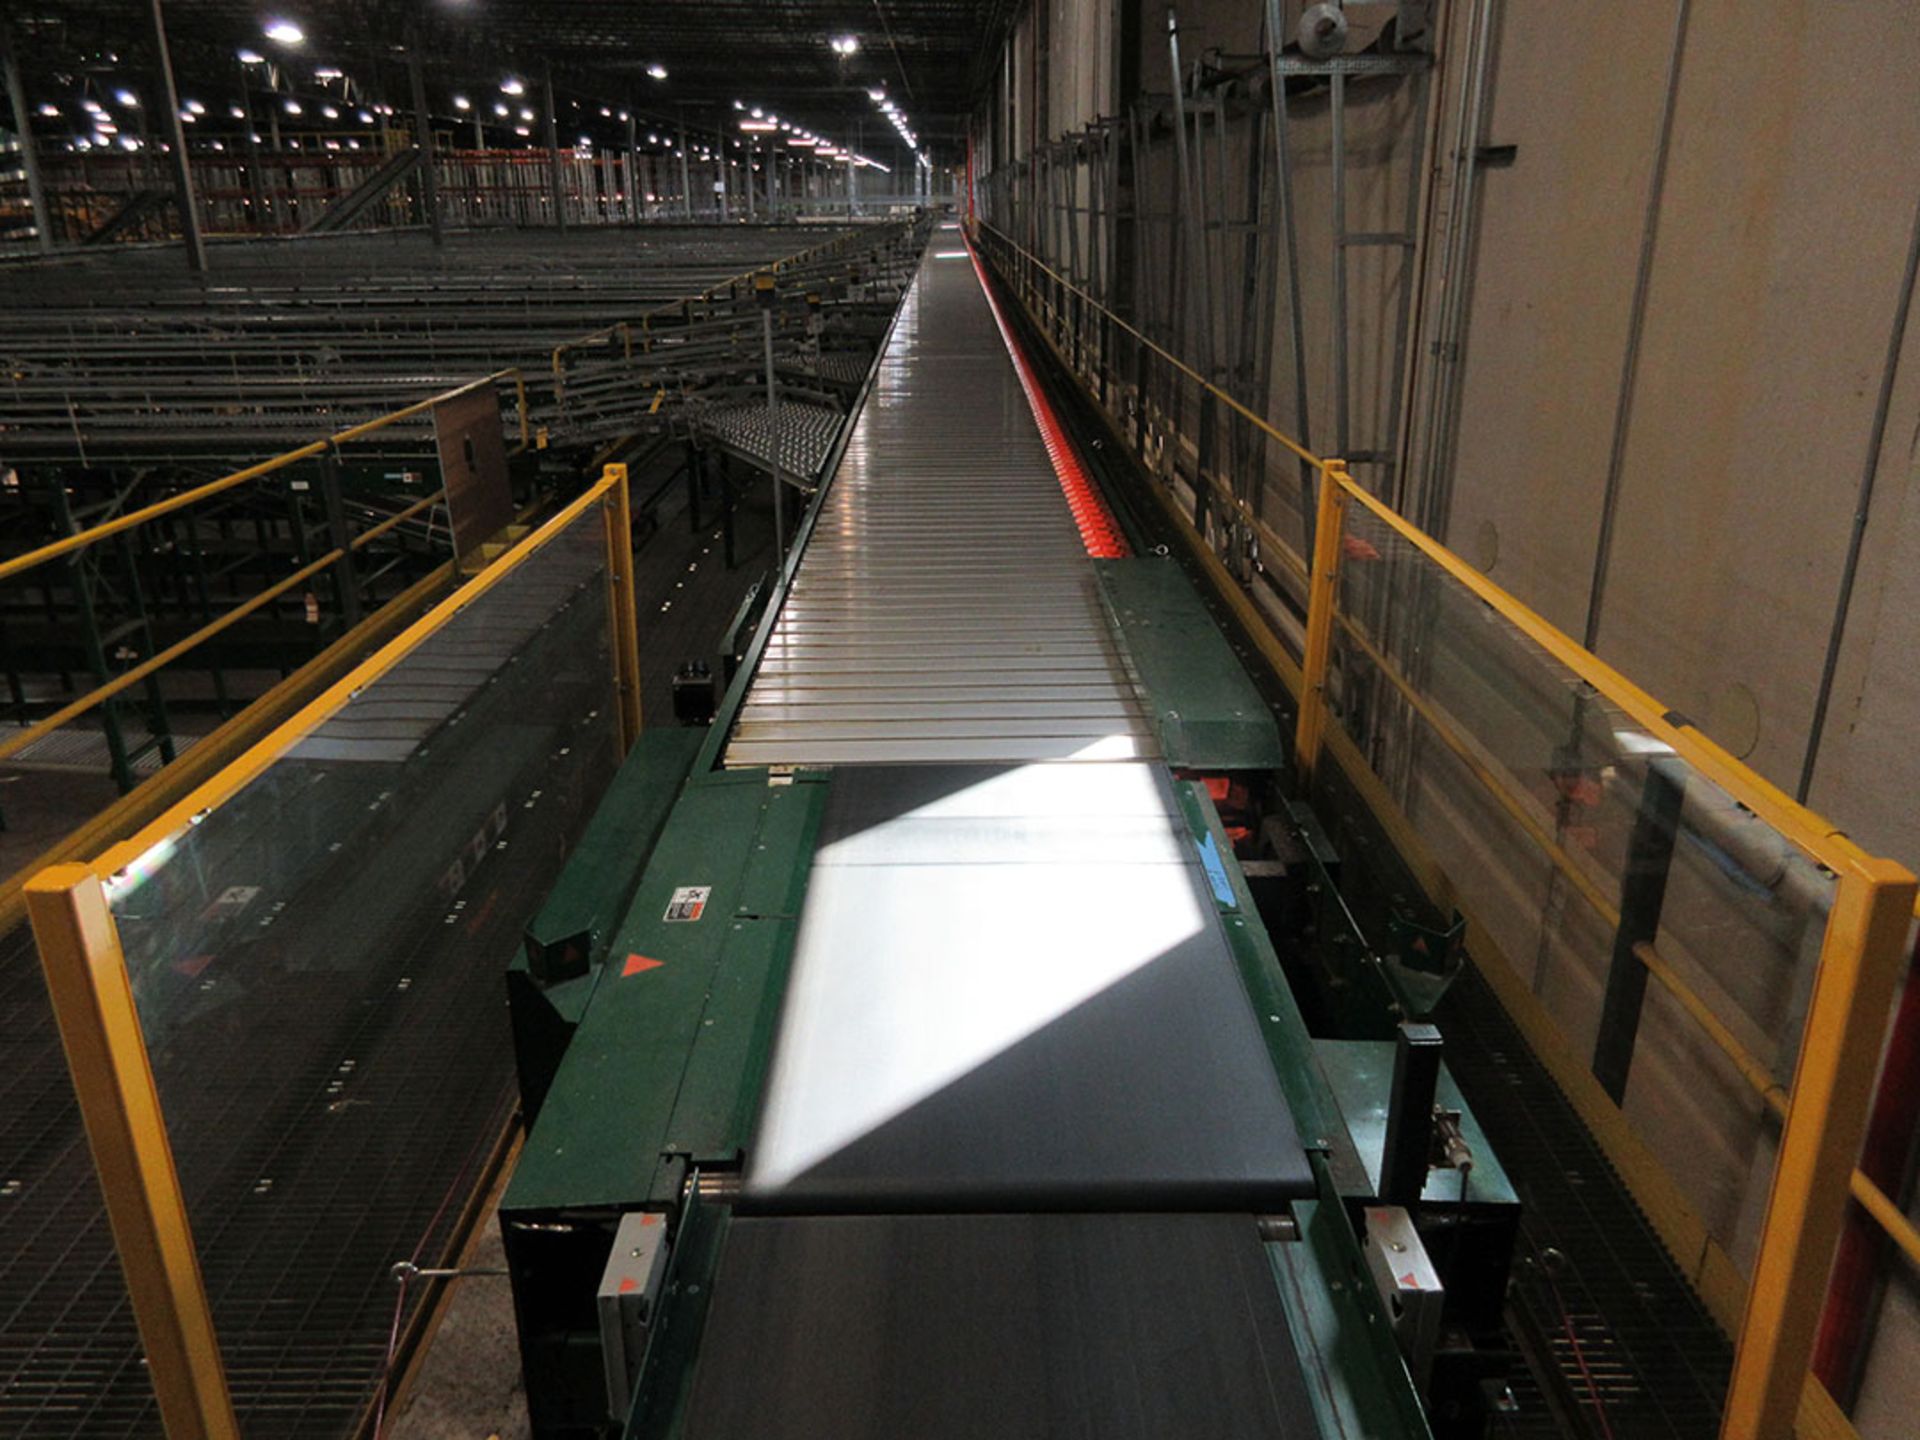 RAPID STAND DERMADIC 50-LANE SORTING SYSTEM WITH OUTLET CURVE CONVEYOR